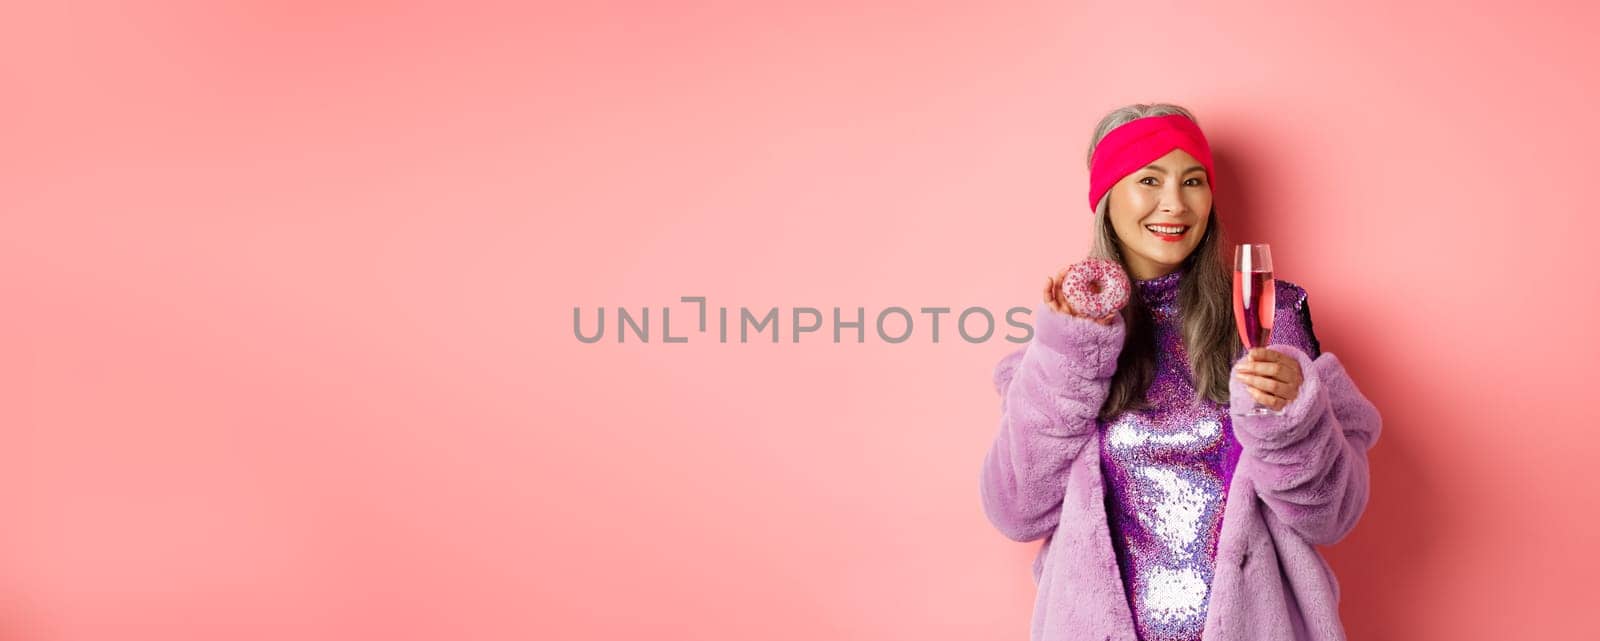 Elegant and stylish asian woman in purple faux fur coat eating donuts and drinking champagne, having fun at party, standing over pink background.